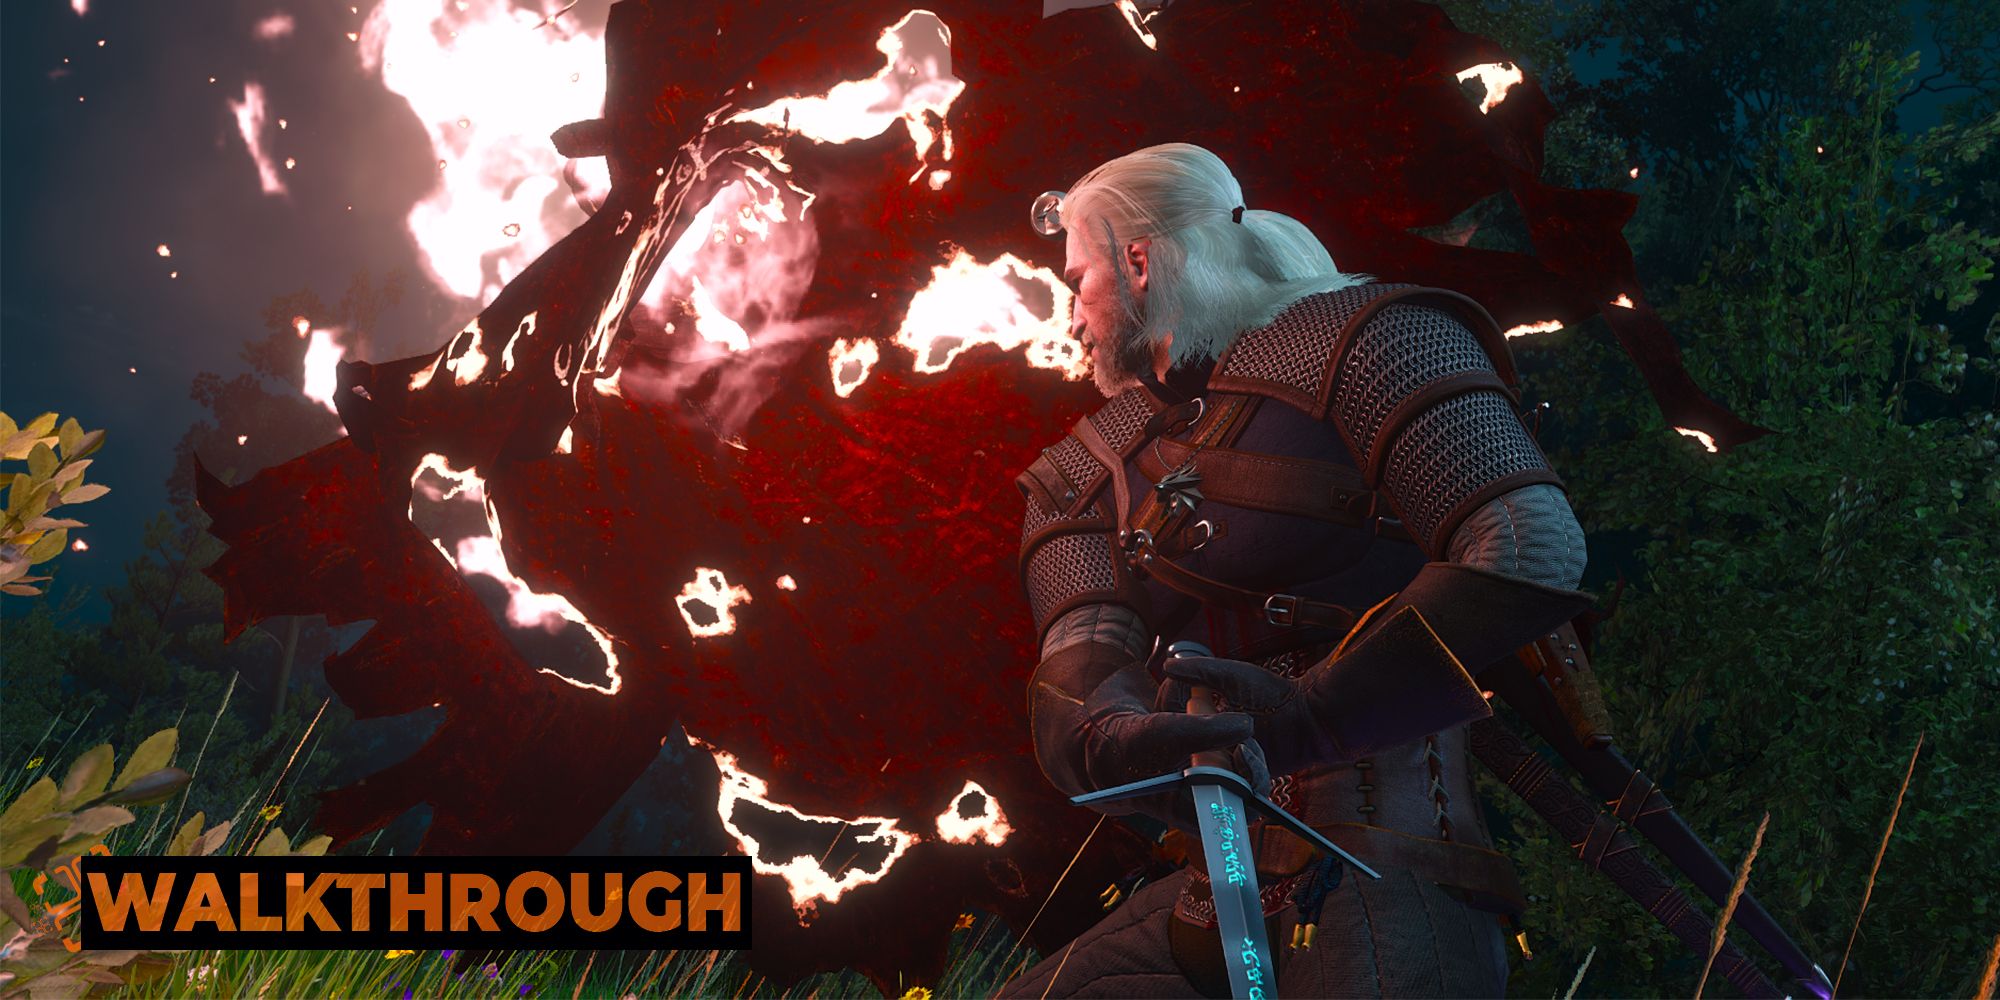 Geralt slickes at a nightwraith, bathing the scene in a red glow.